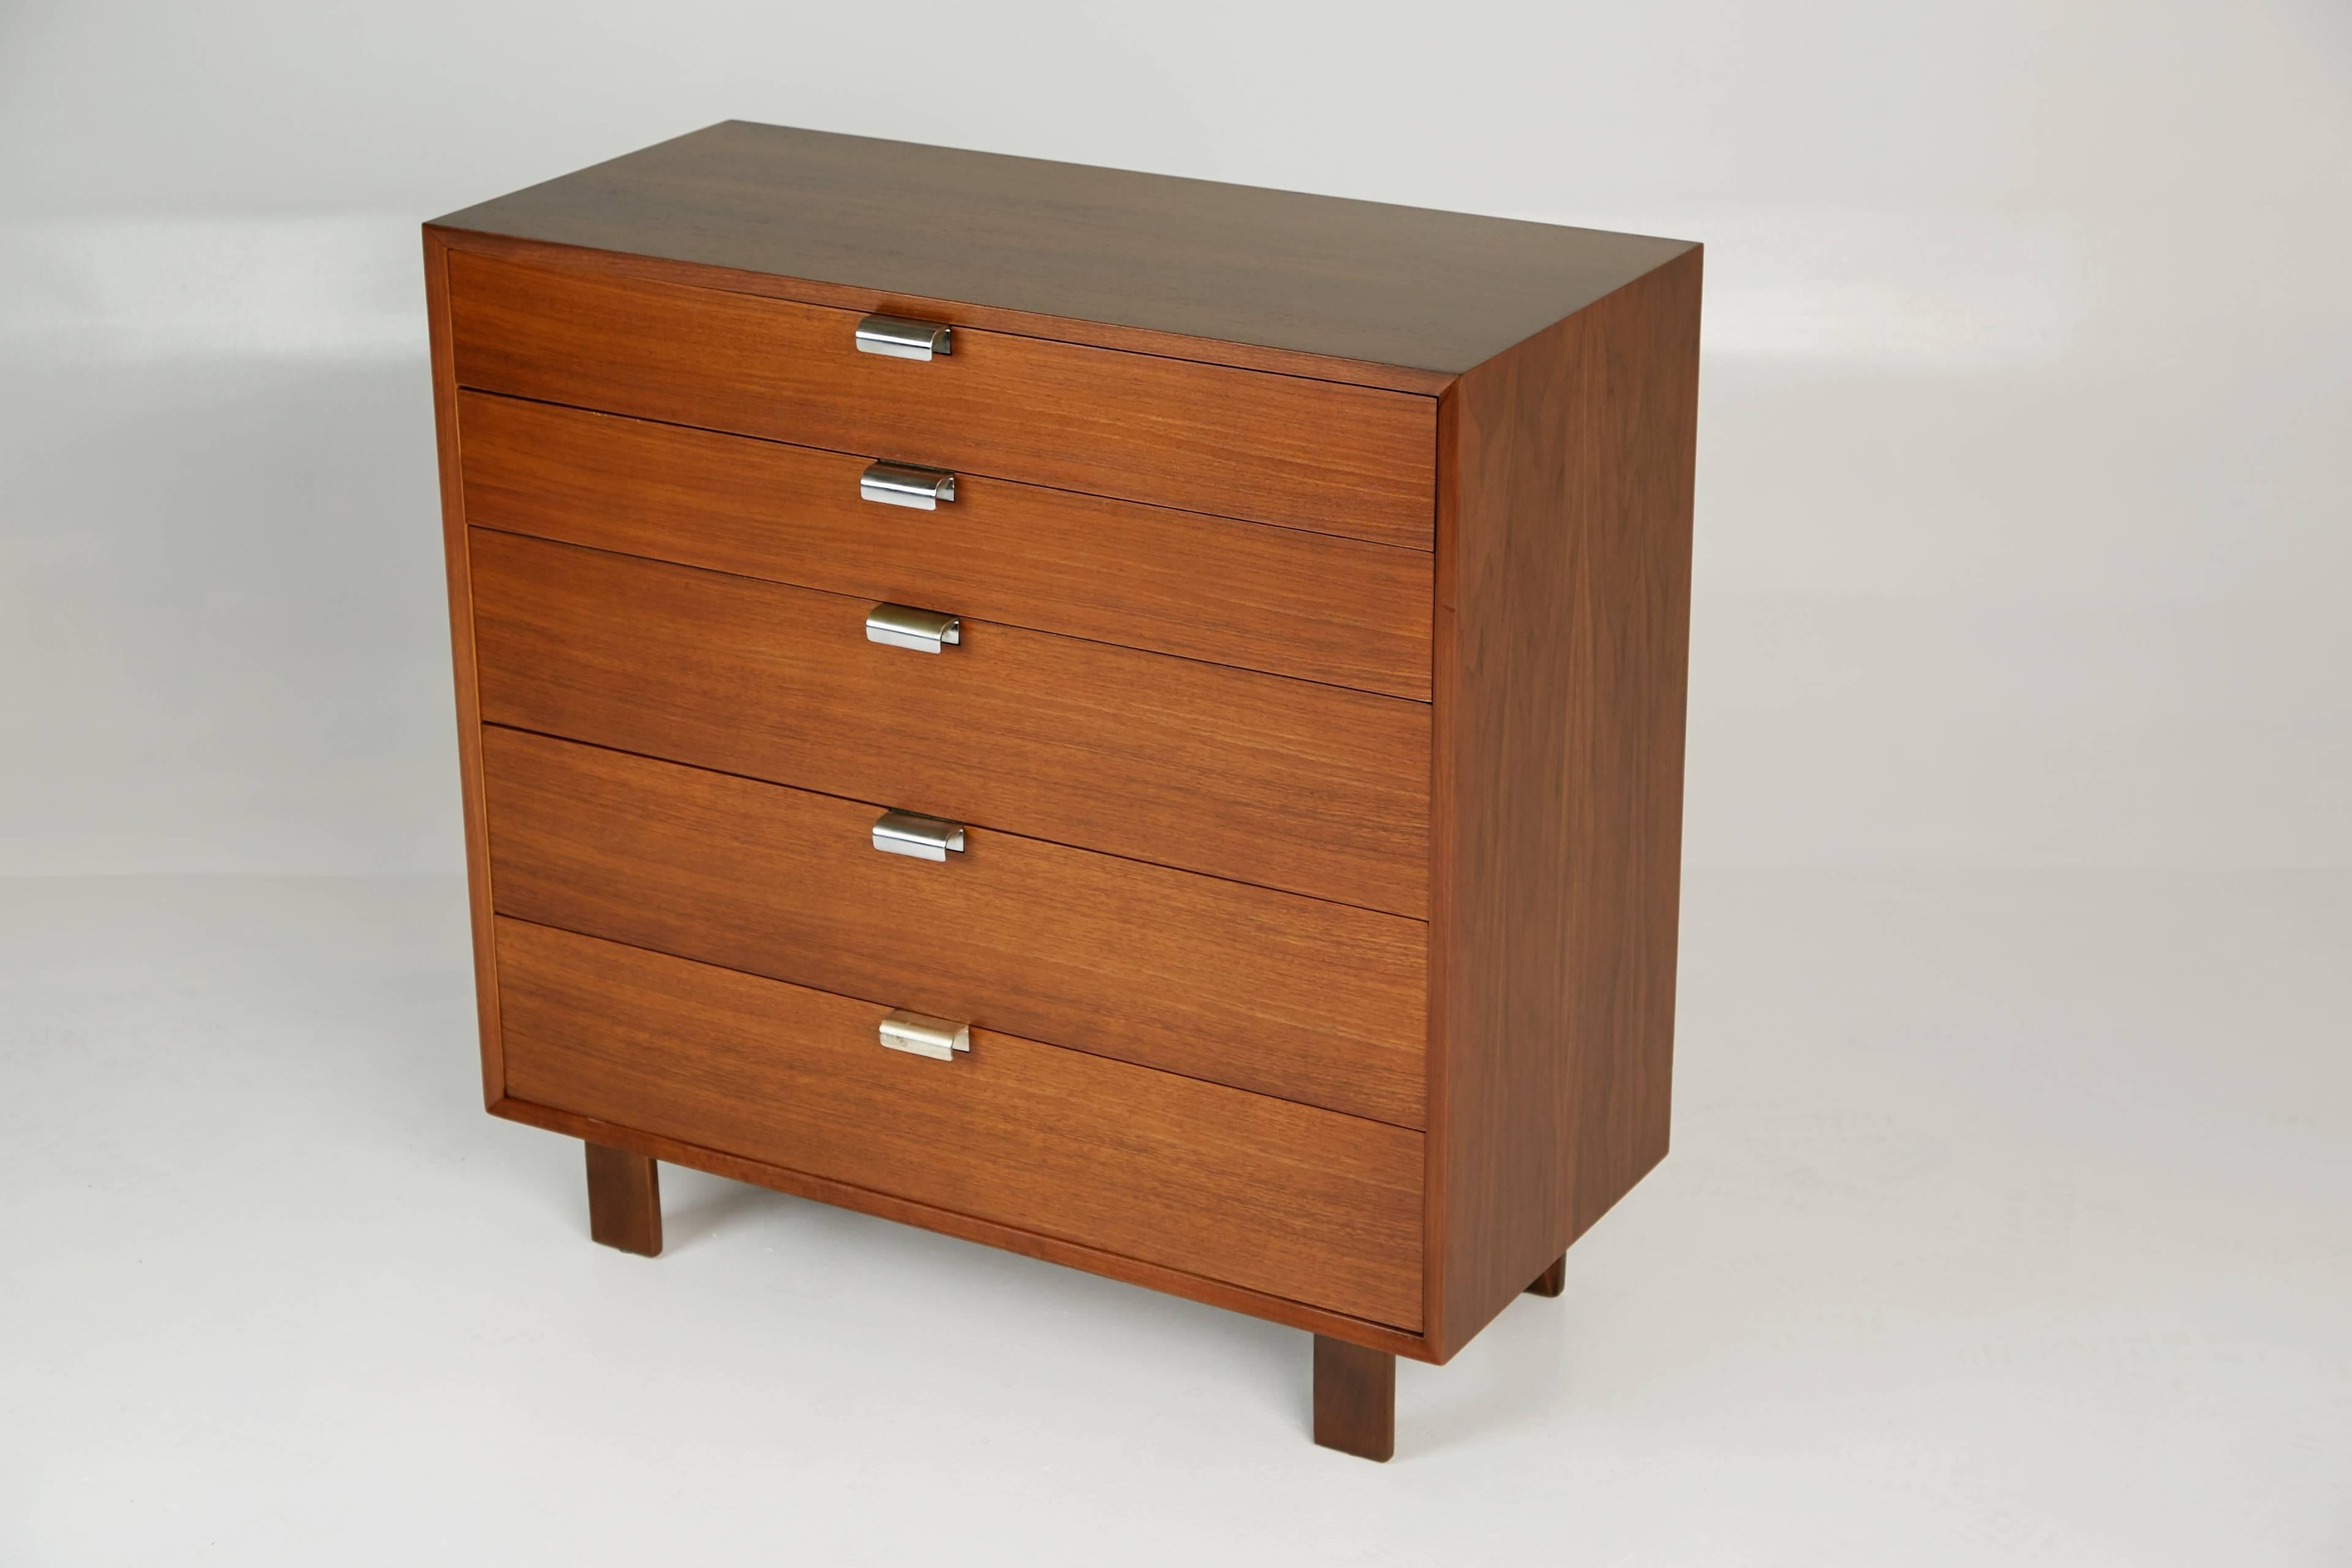 Designed by George Nelson, this highboy dresser was part of Herman Miller's collection of modular basic storage components. The chest has been newly refinished and features beautiful wood grain which displays fluid movement and variation in tone.